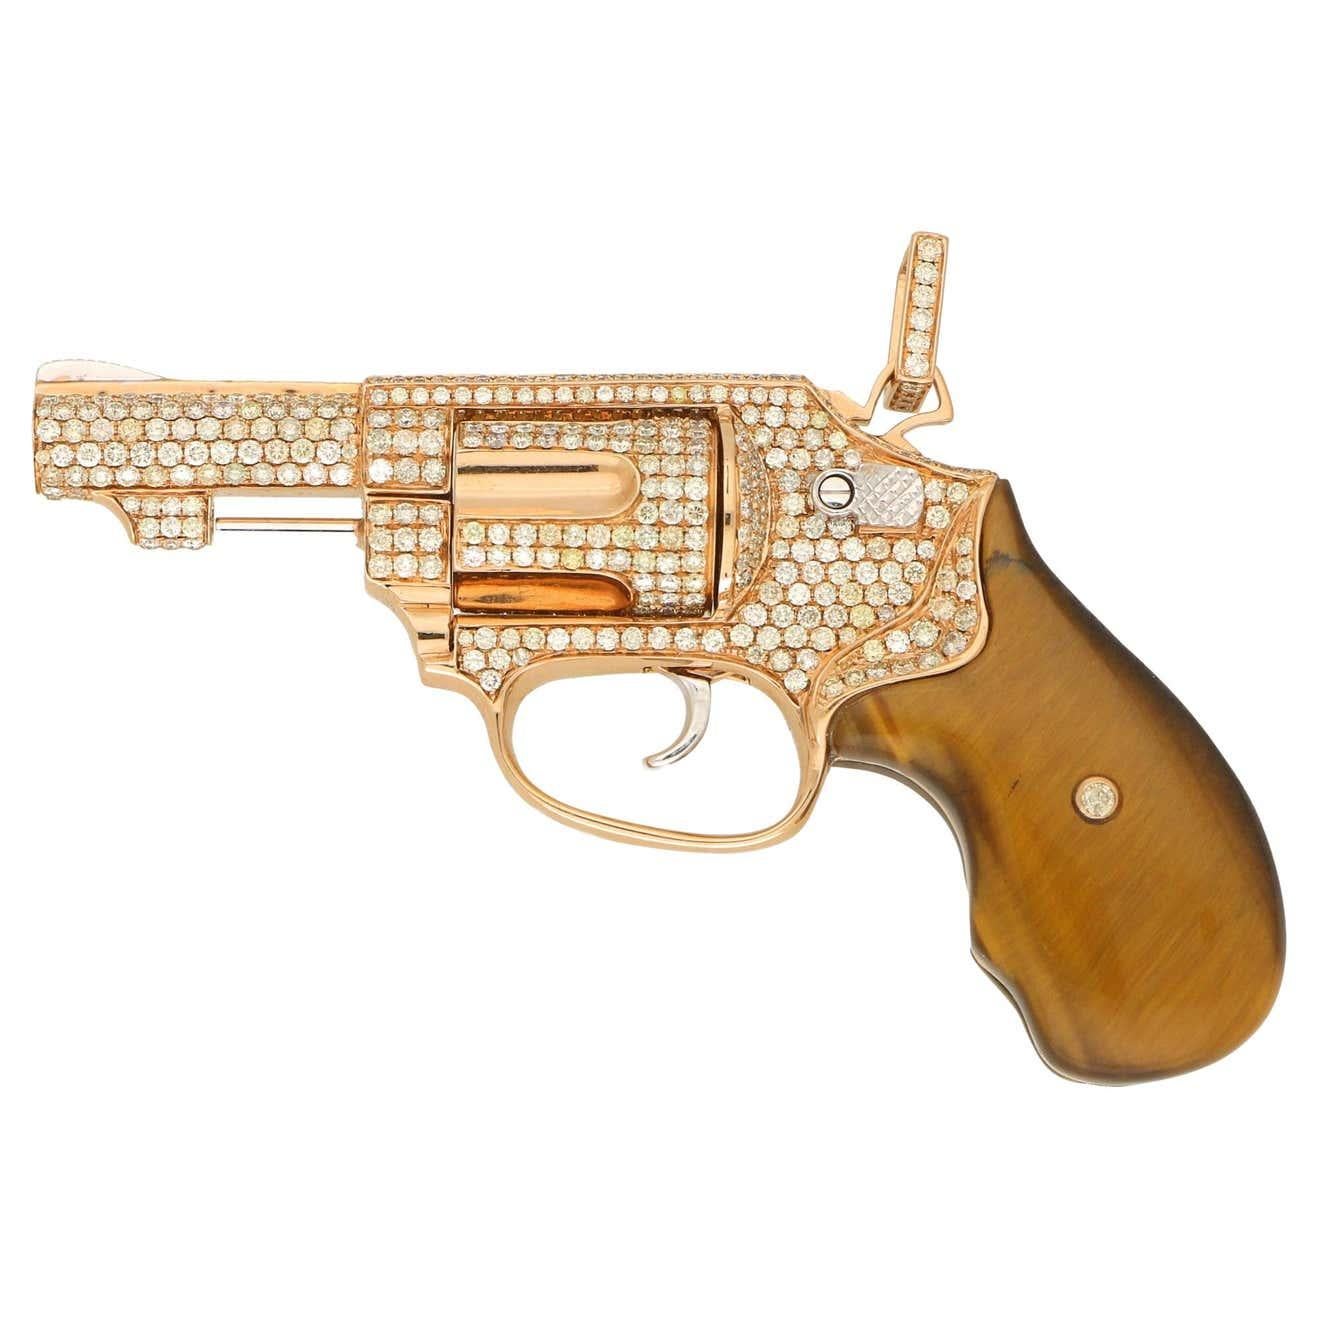 Diamond Gun Revolver Tiger's Eye Gem 18 Karat Rose Gold Giant Necklace Pendant
18 Karat Gold
Genuine Tiger’s Eye Stone & Natural Diamonds 13.50 CTW
Approximate Mini Peacemaker Length: 7.85” inches / 20 centimeters / Gross Weight: 75g

Made to Order